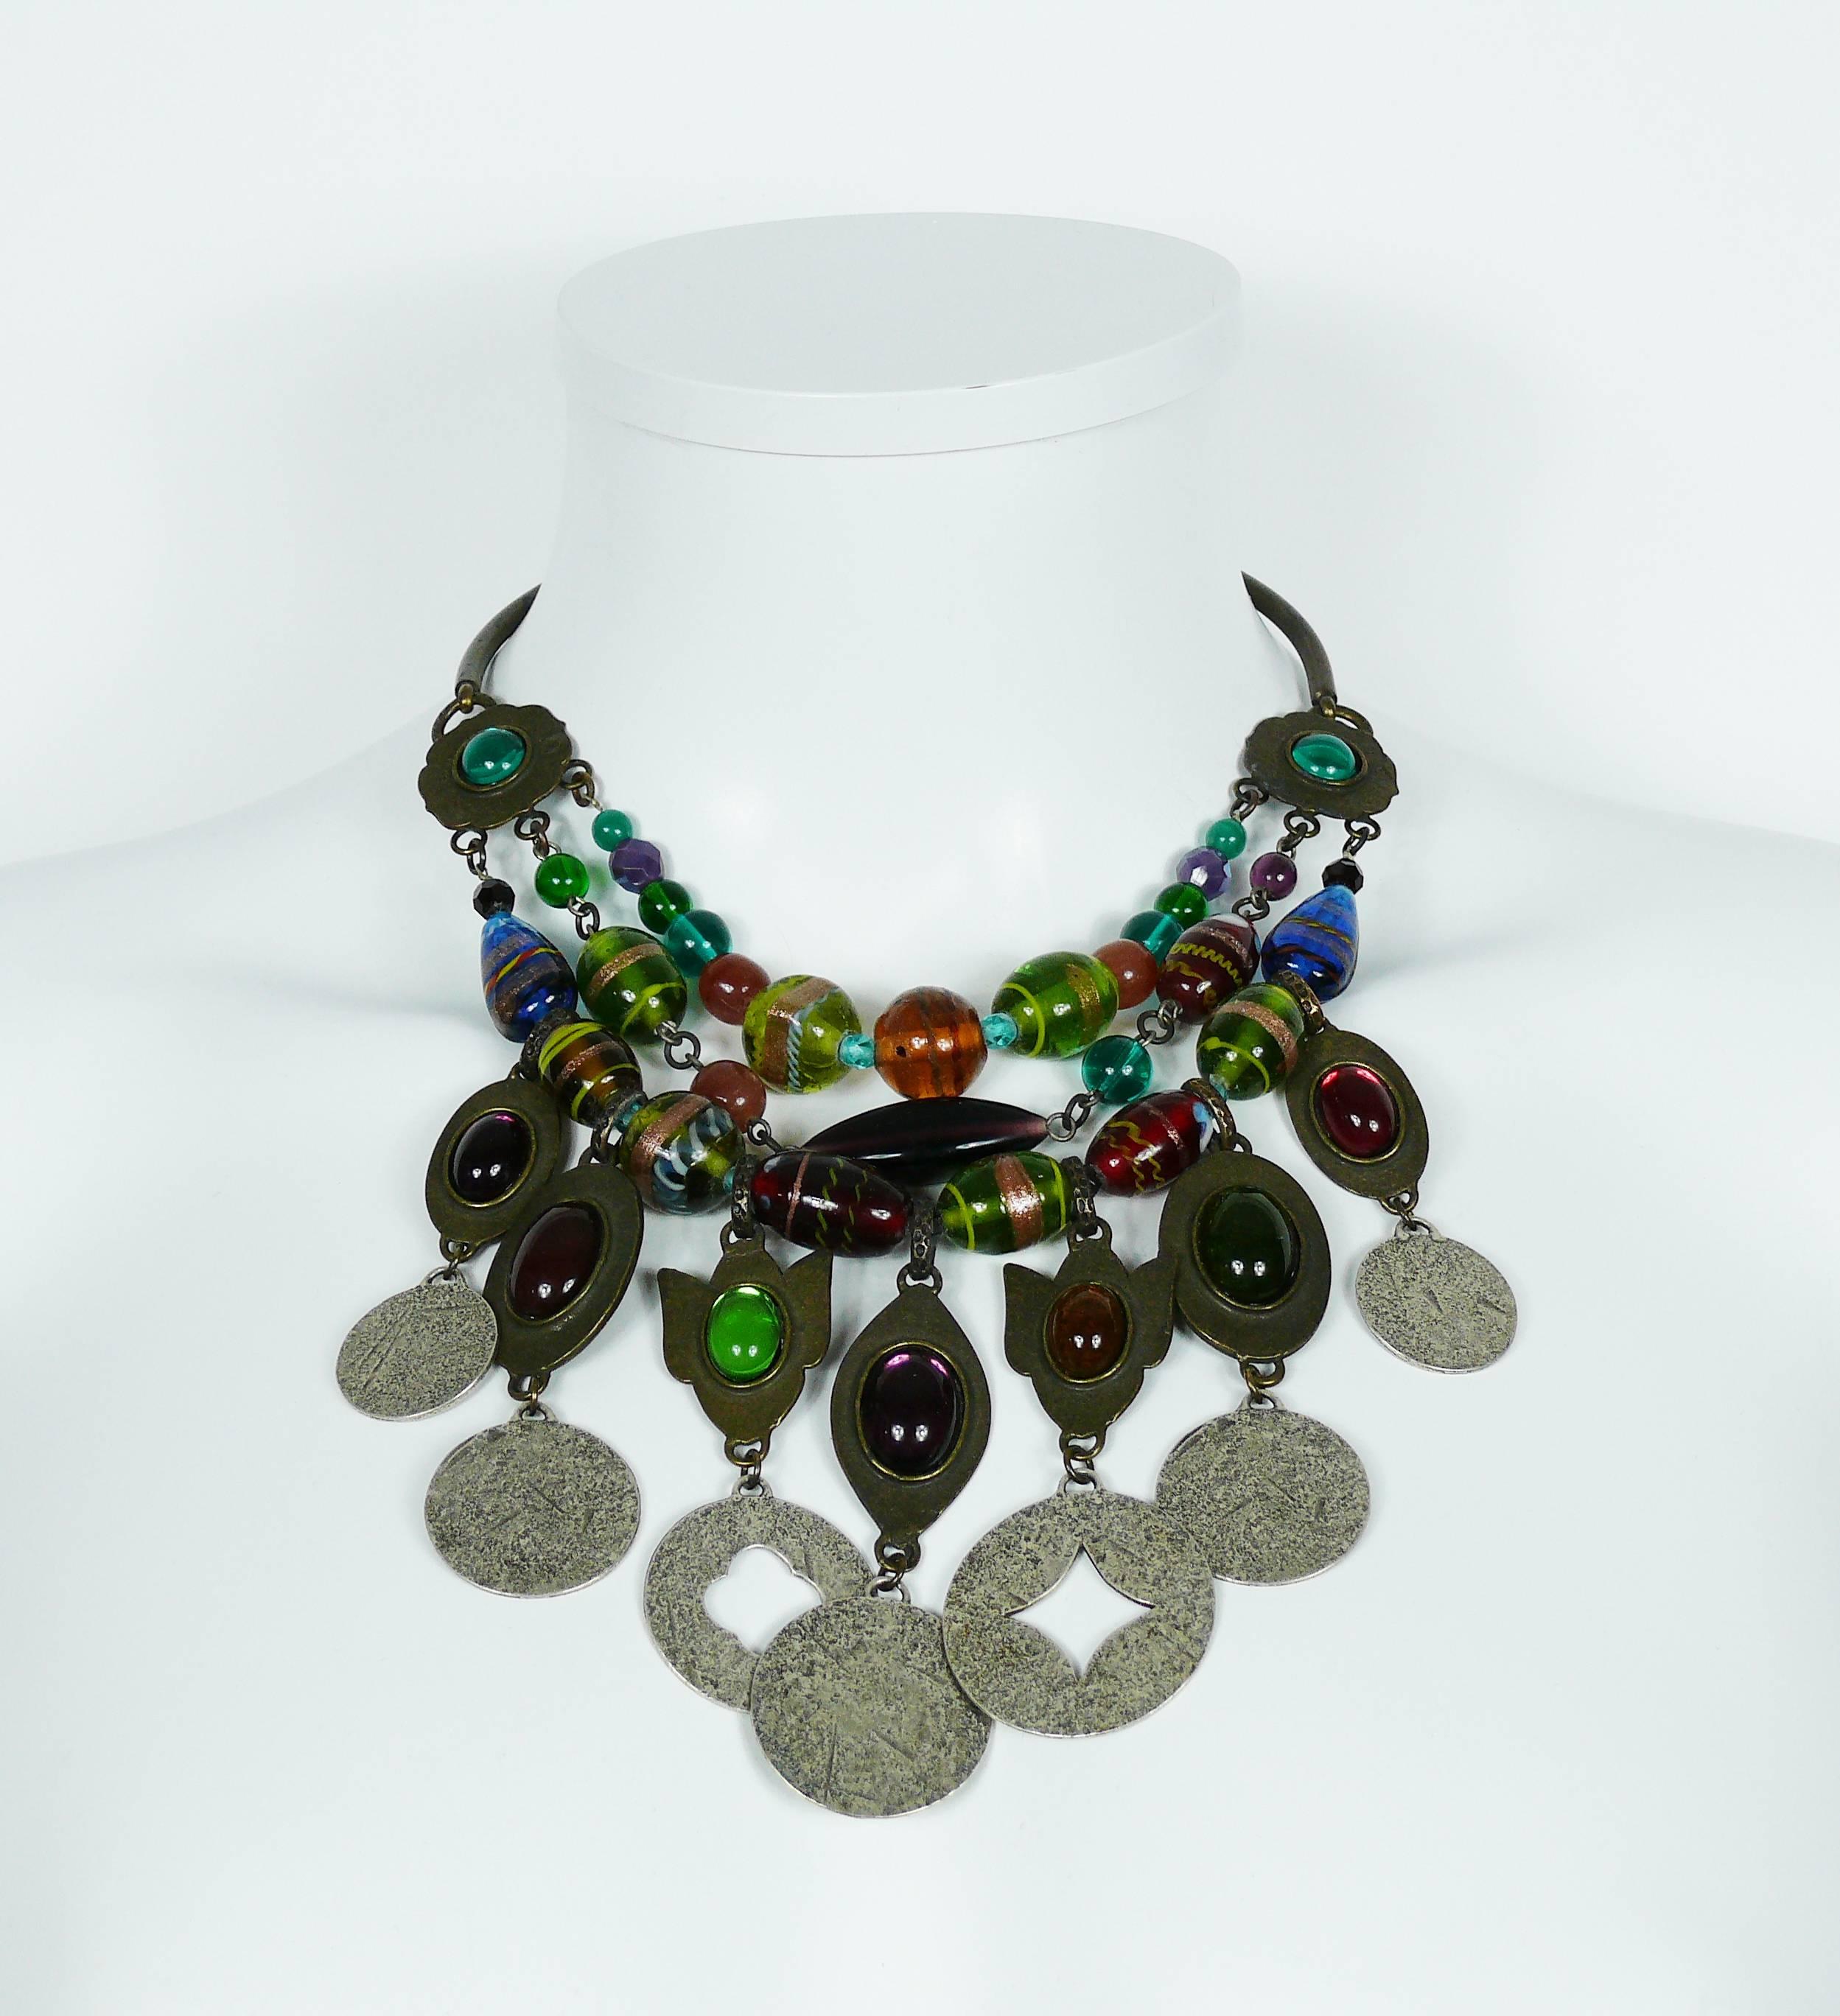 PHILIPPE FERRANDIS antique patina finish bib necklace, featuring three glass bead strands.
 
Necklace features seven metal charms, some perforated and some others with oval shaped glass cabochons.

Hook clasp.
Extension chain.

Marked PHILIPPE